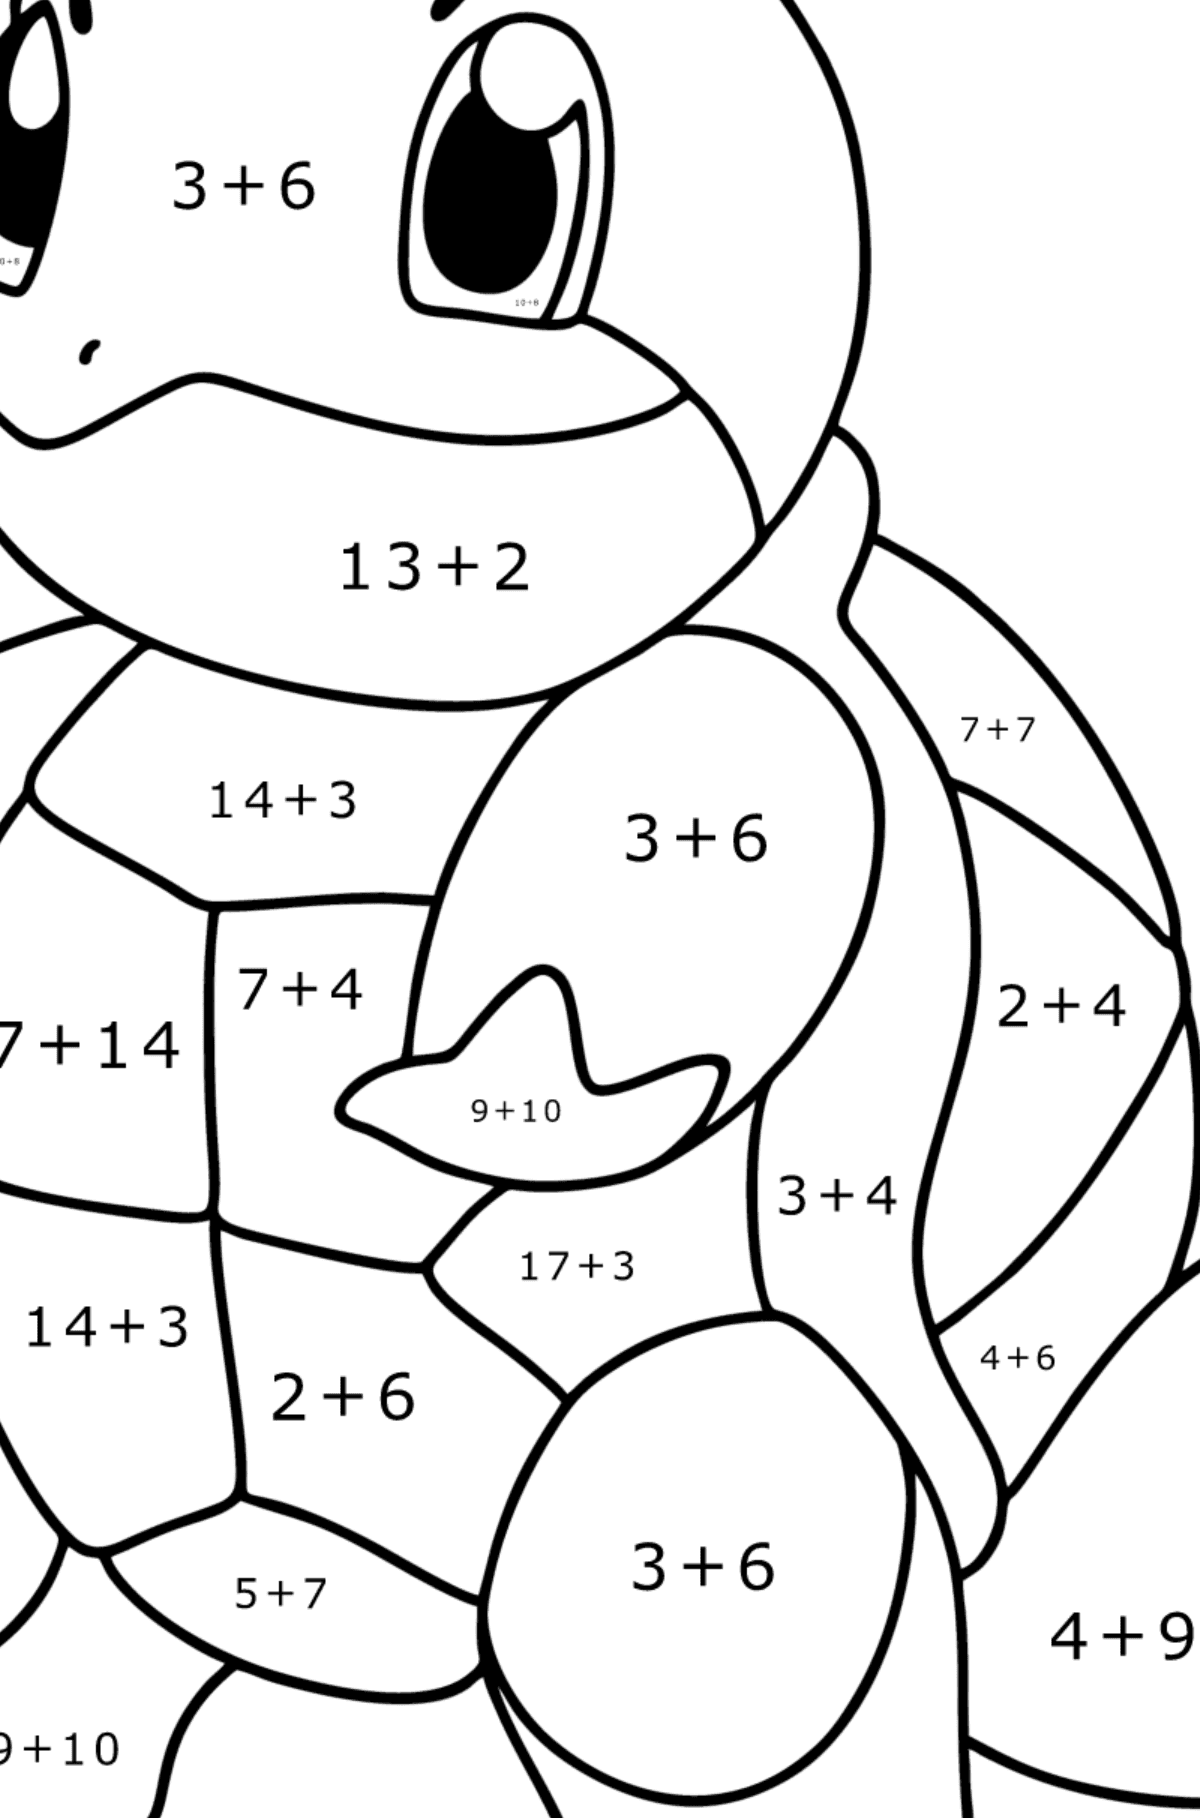 Coloring page Pokémon Go Squirtle - Math Coloring - Addition for Kids